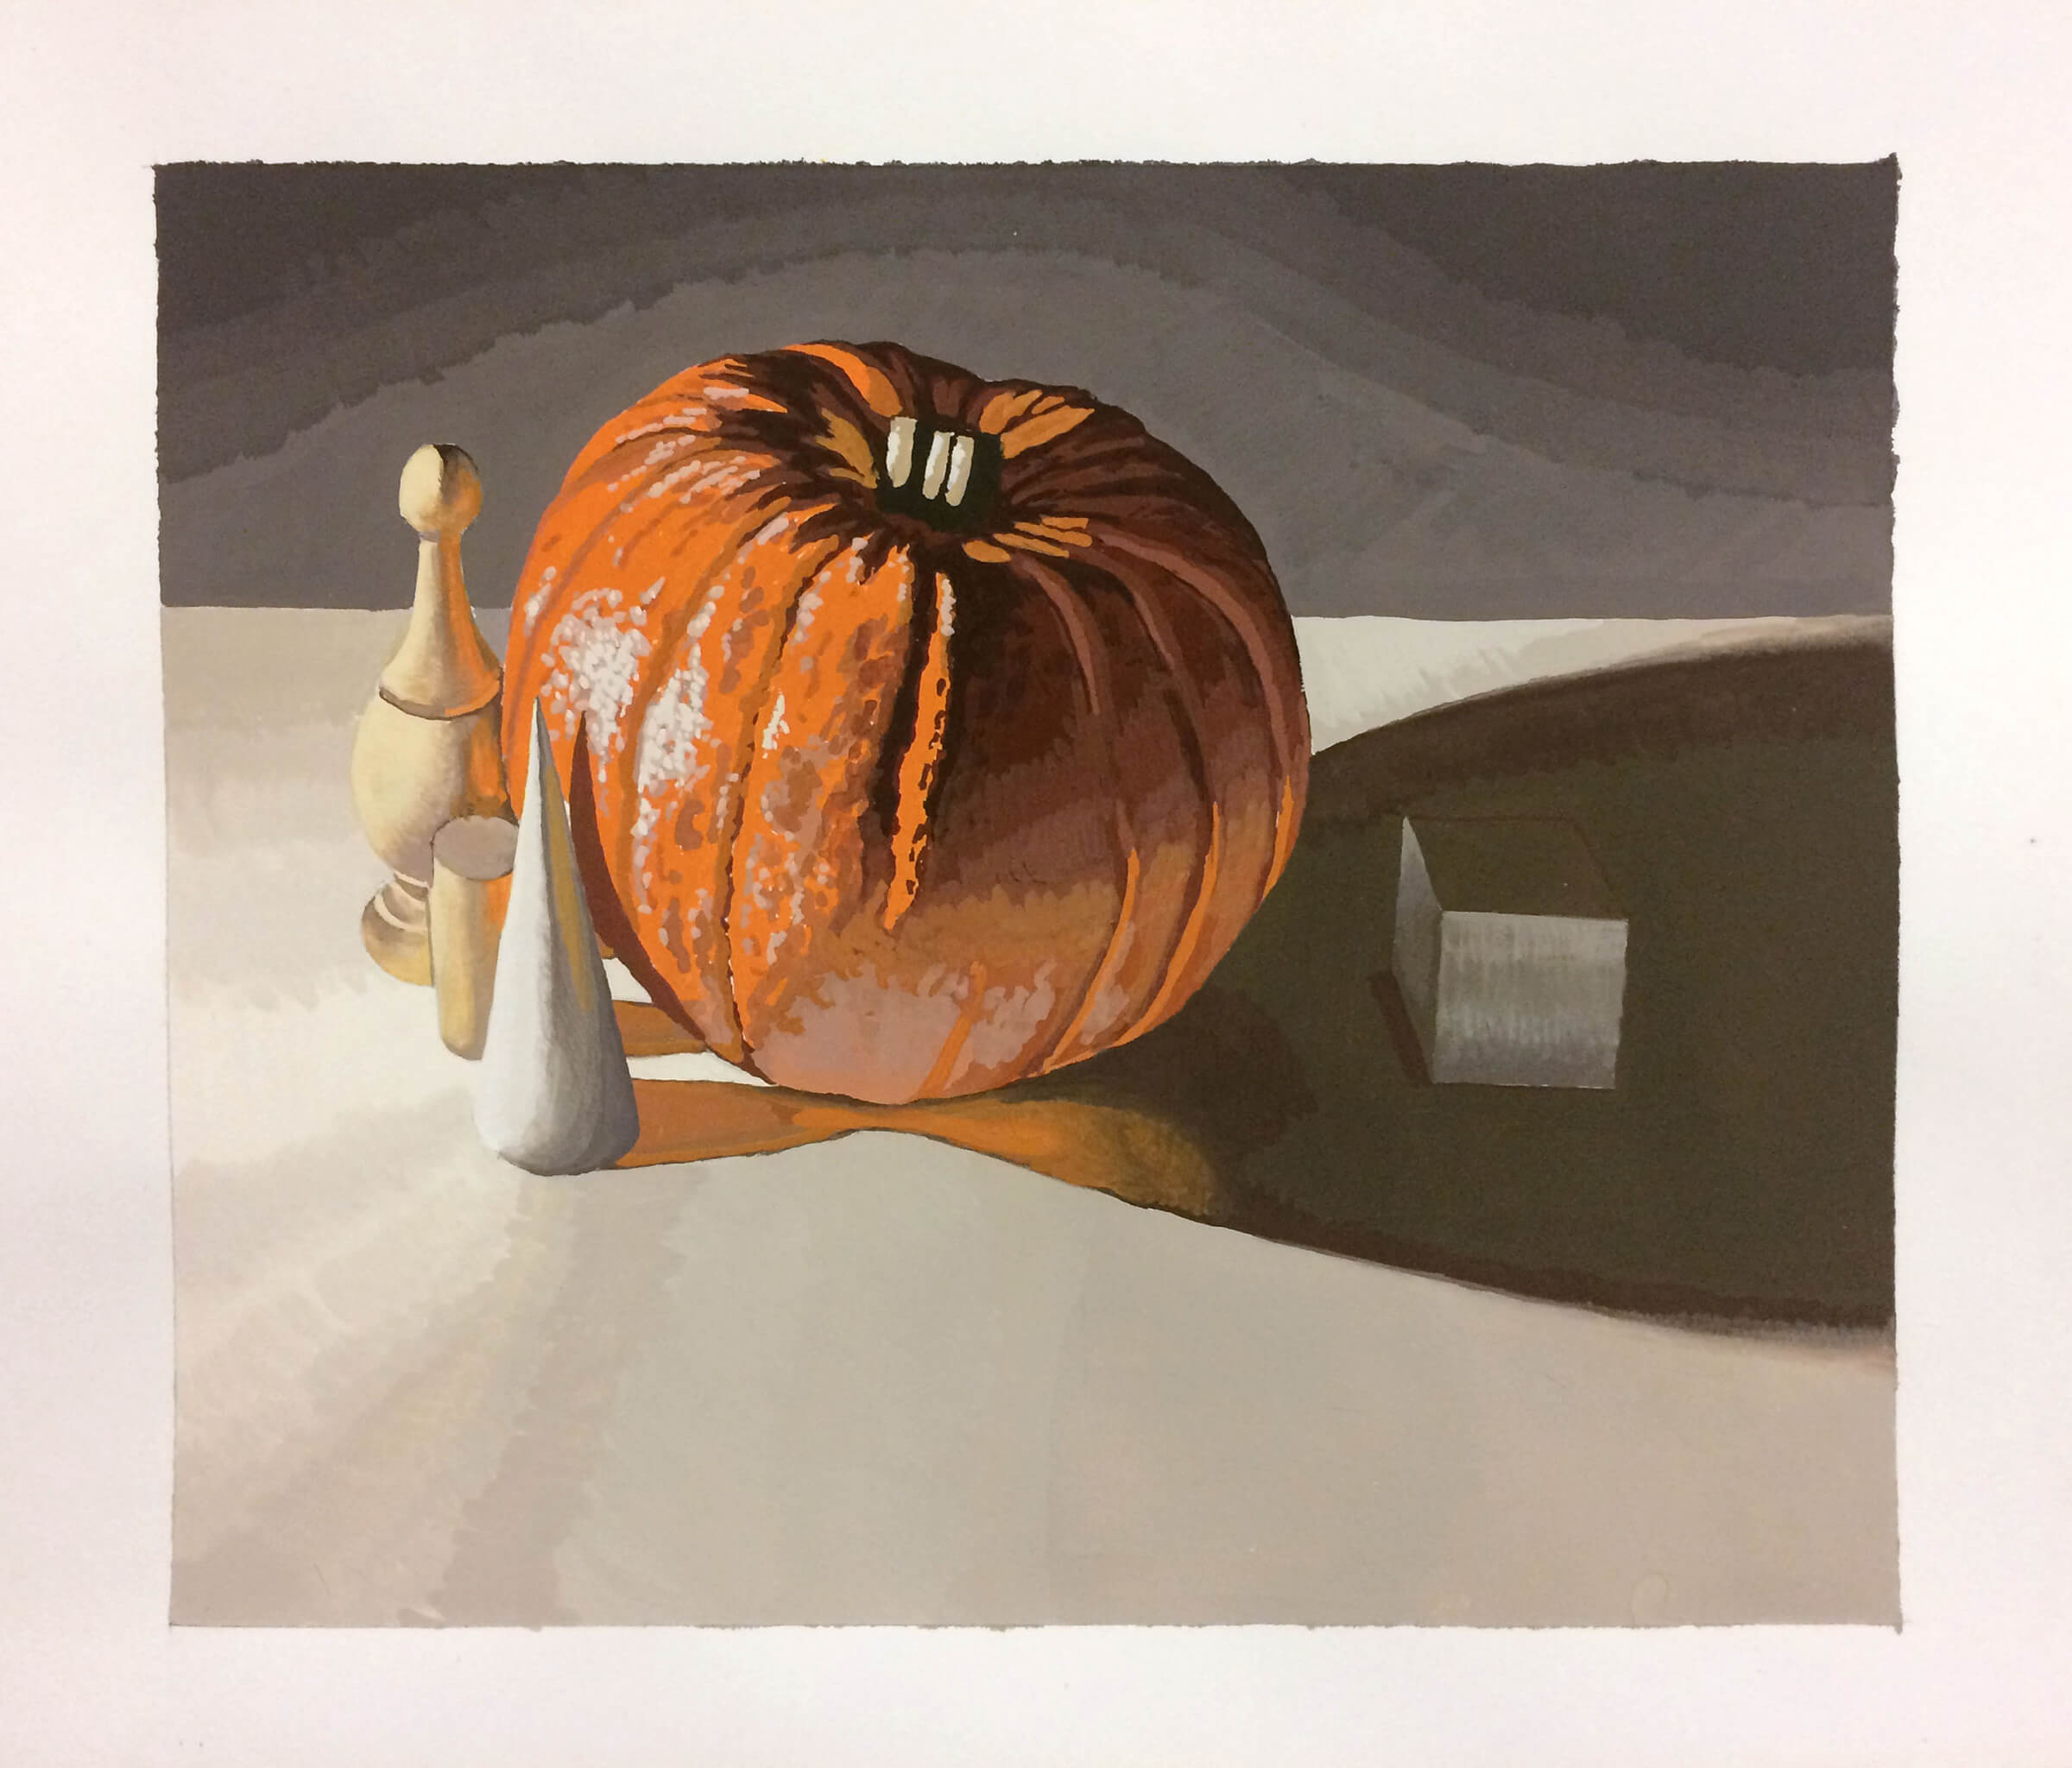 still-life traditional painting of a pumpkin with various objects, including a cube, surrounding it